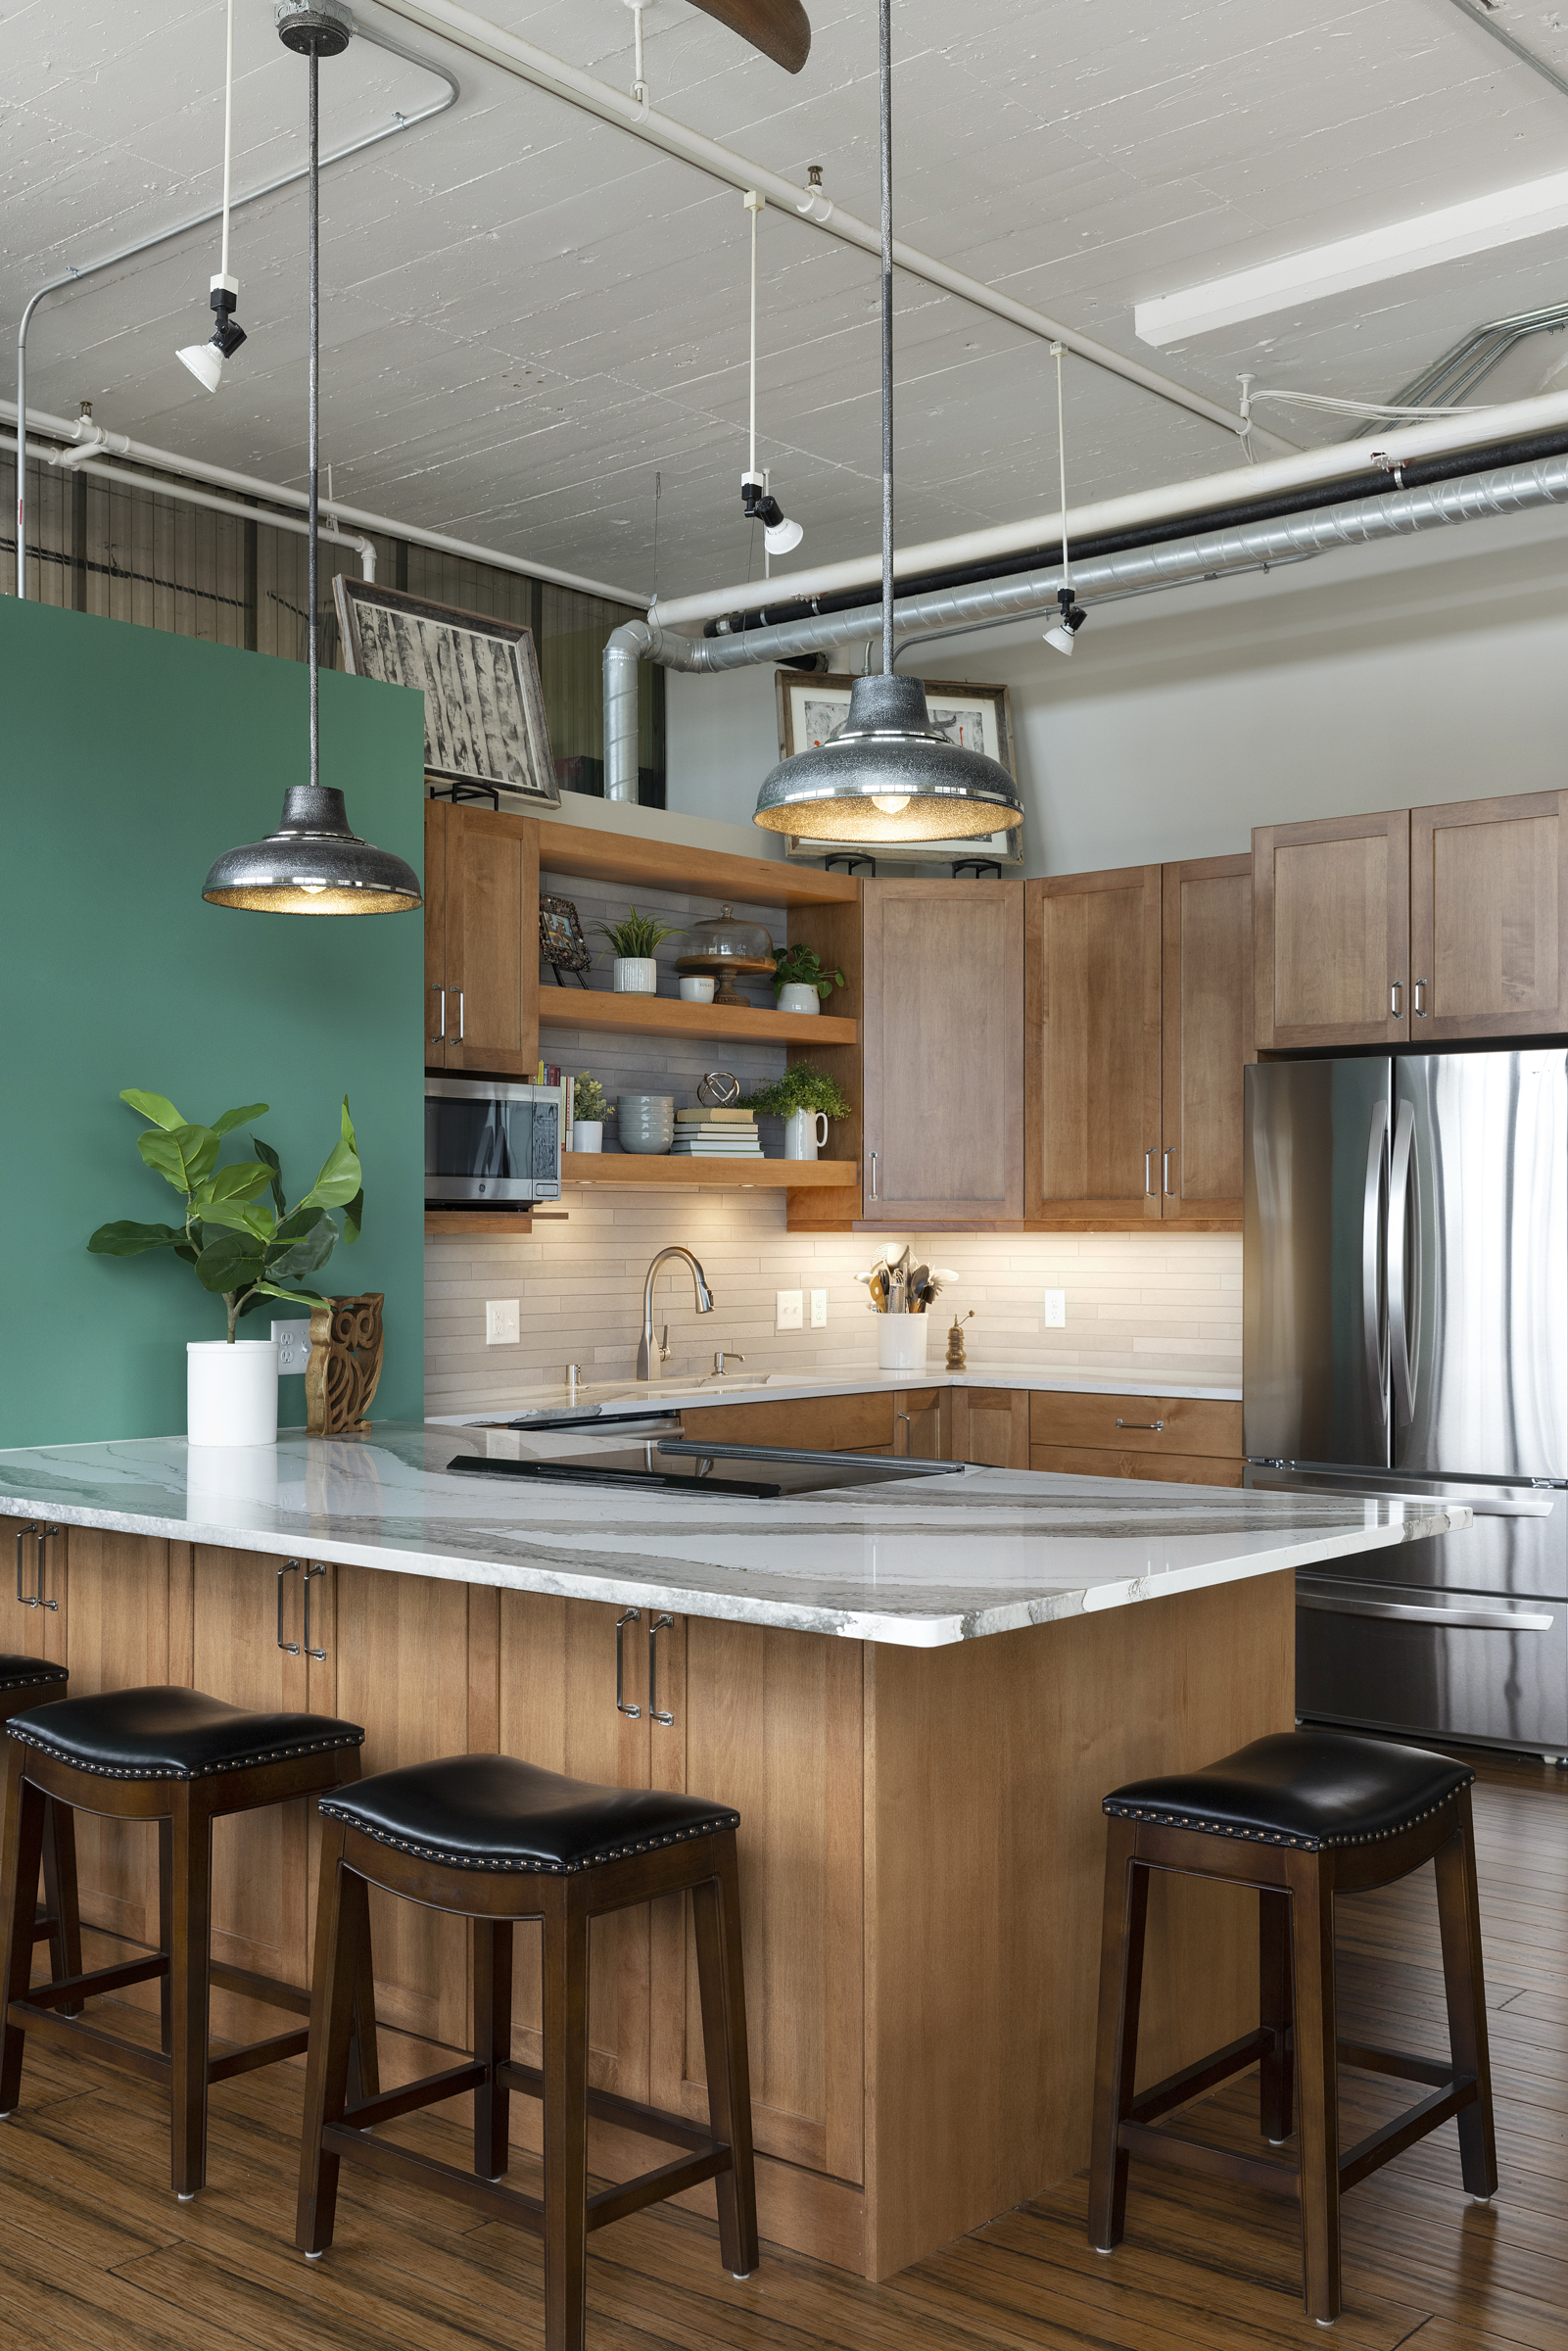 Artistic kitchen renovation with wood cabinets and green accent wall